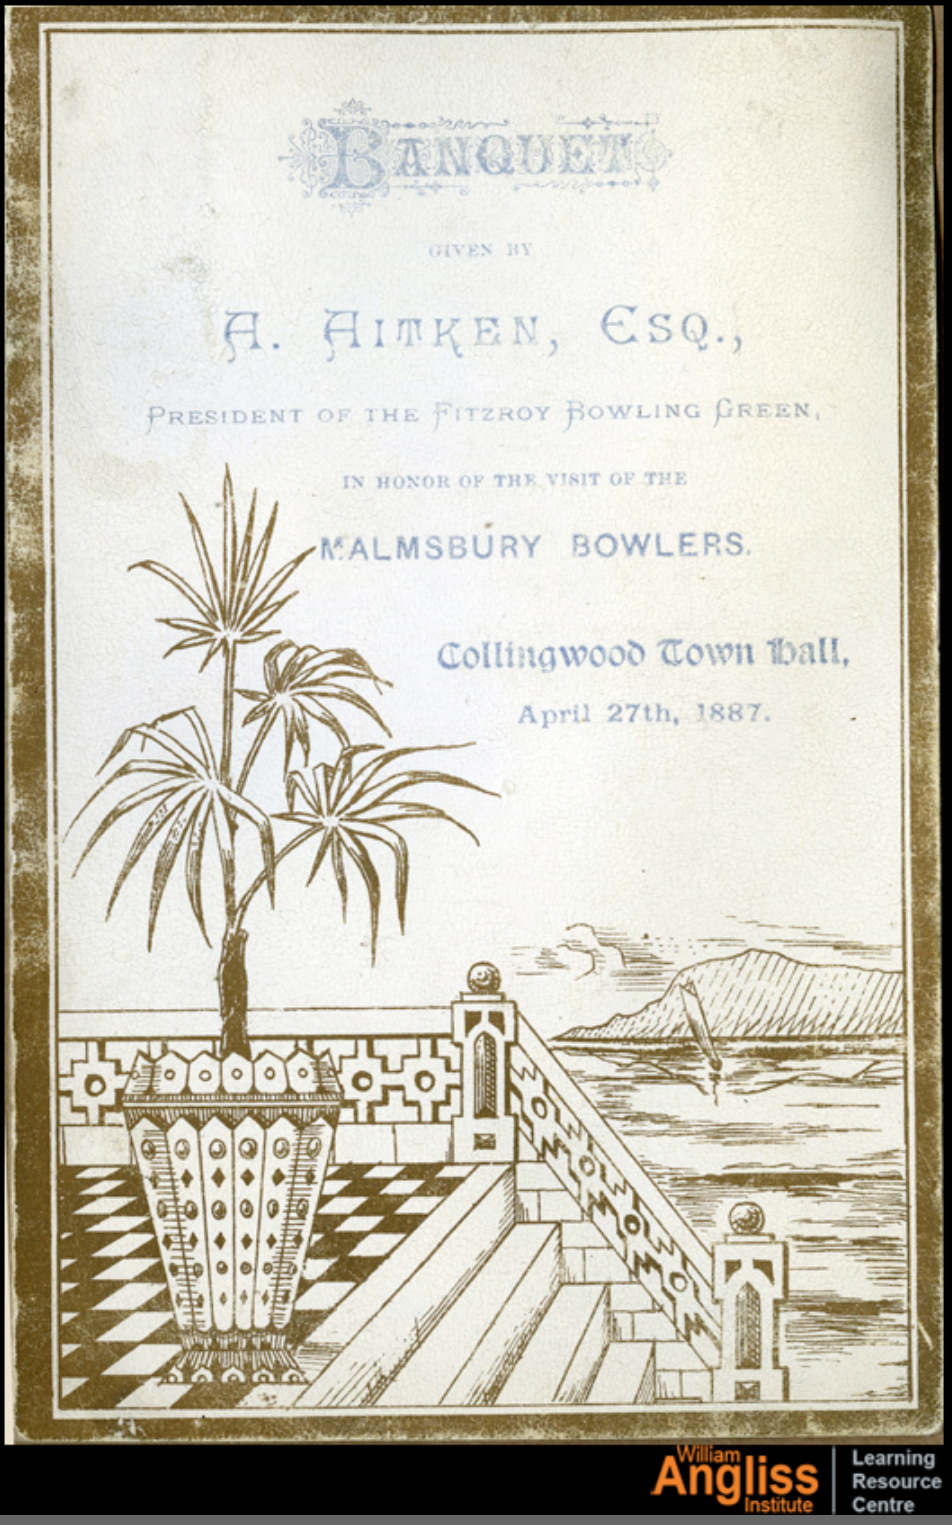 Banquet menu given By A. Aitken, Esq., President of The Fitzroy Bowling Green, In Honor of The Visit Of The Malmsbury Bowlers, 1887 